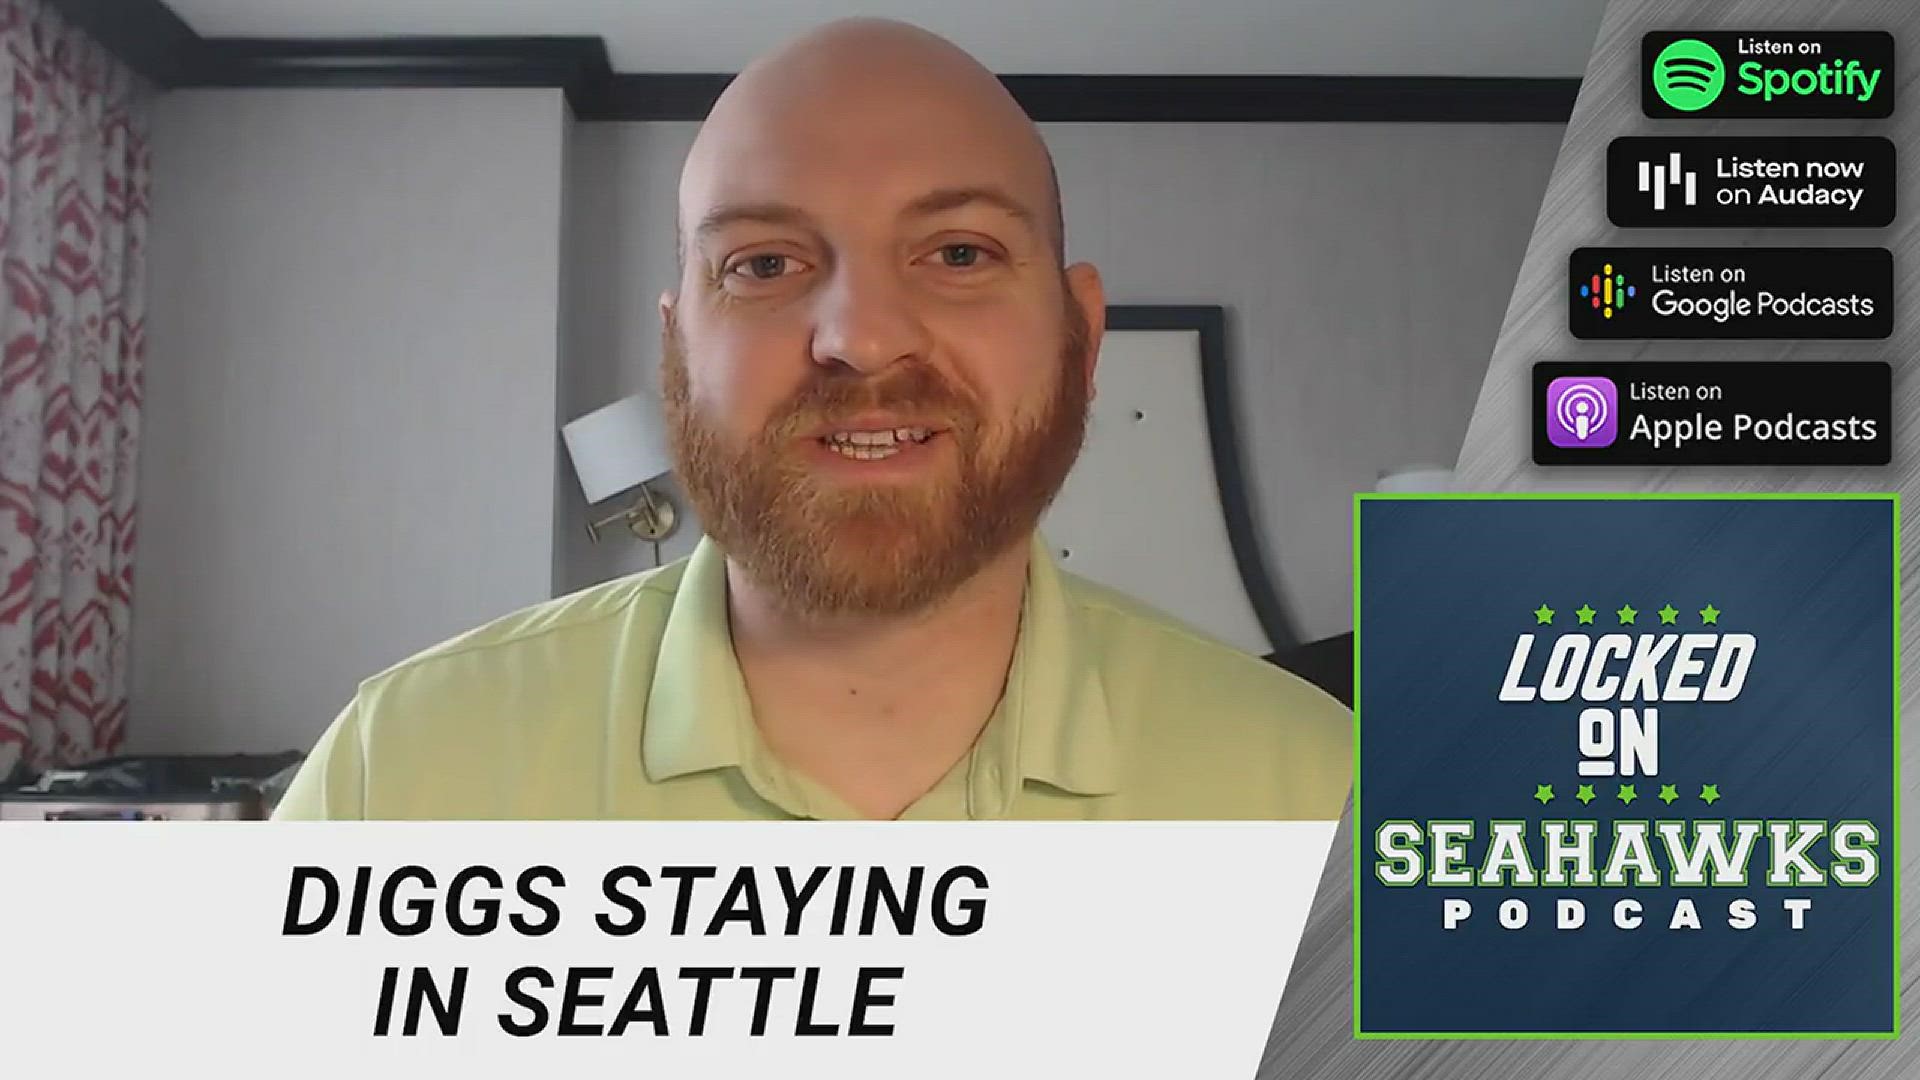 The Seahawks re-signed safety Quandre Diggs for 3 years at 40 million dollars.  Locked on Seahawks podcast host Corbin Smith breaks down the deal.